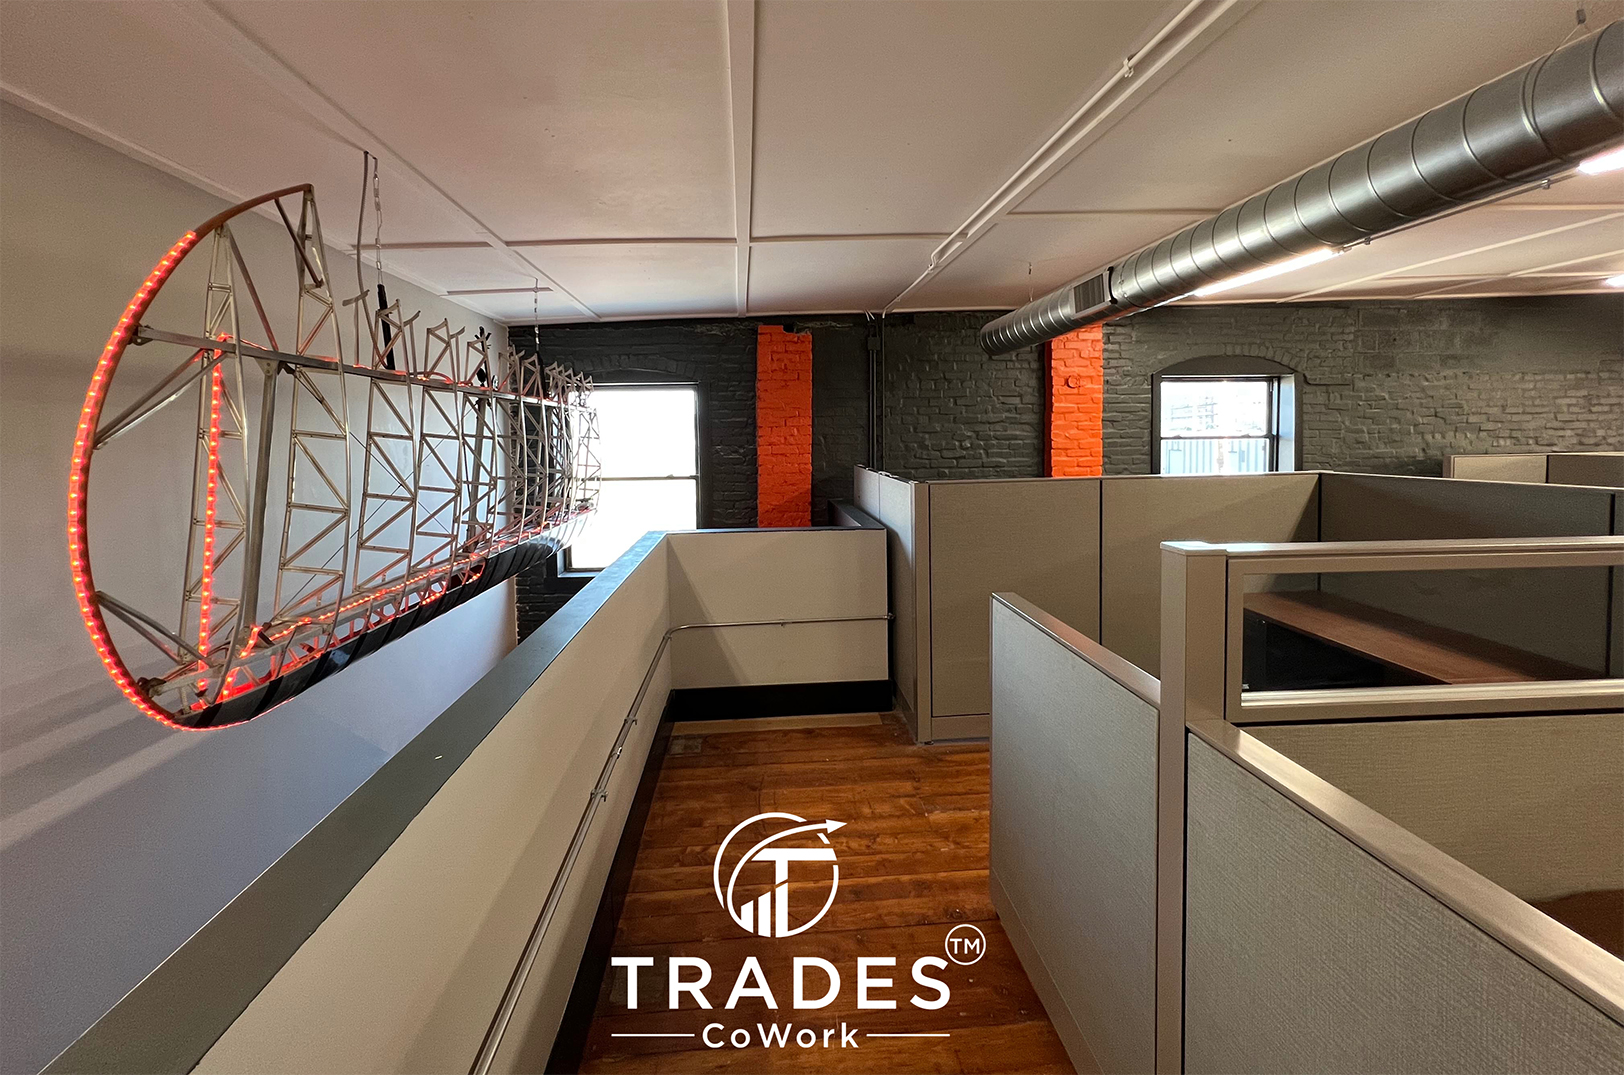 Trades Wing and Private Desks